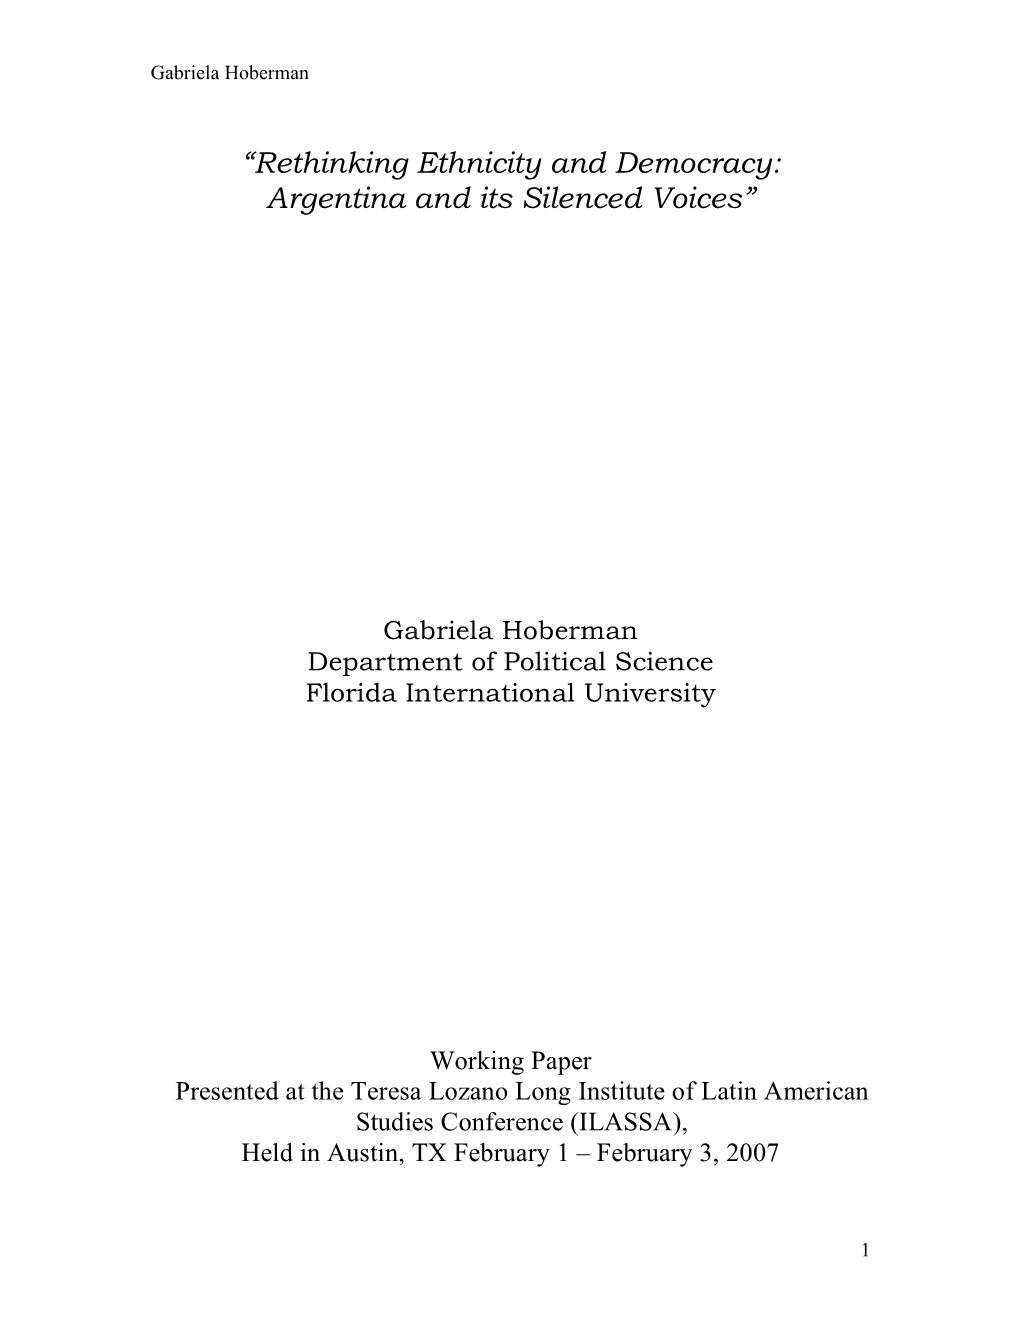 “Rethinking Ethnicity and Democracy: Argentina and Its Silenced Voices”